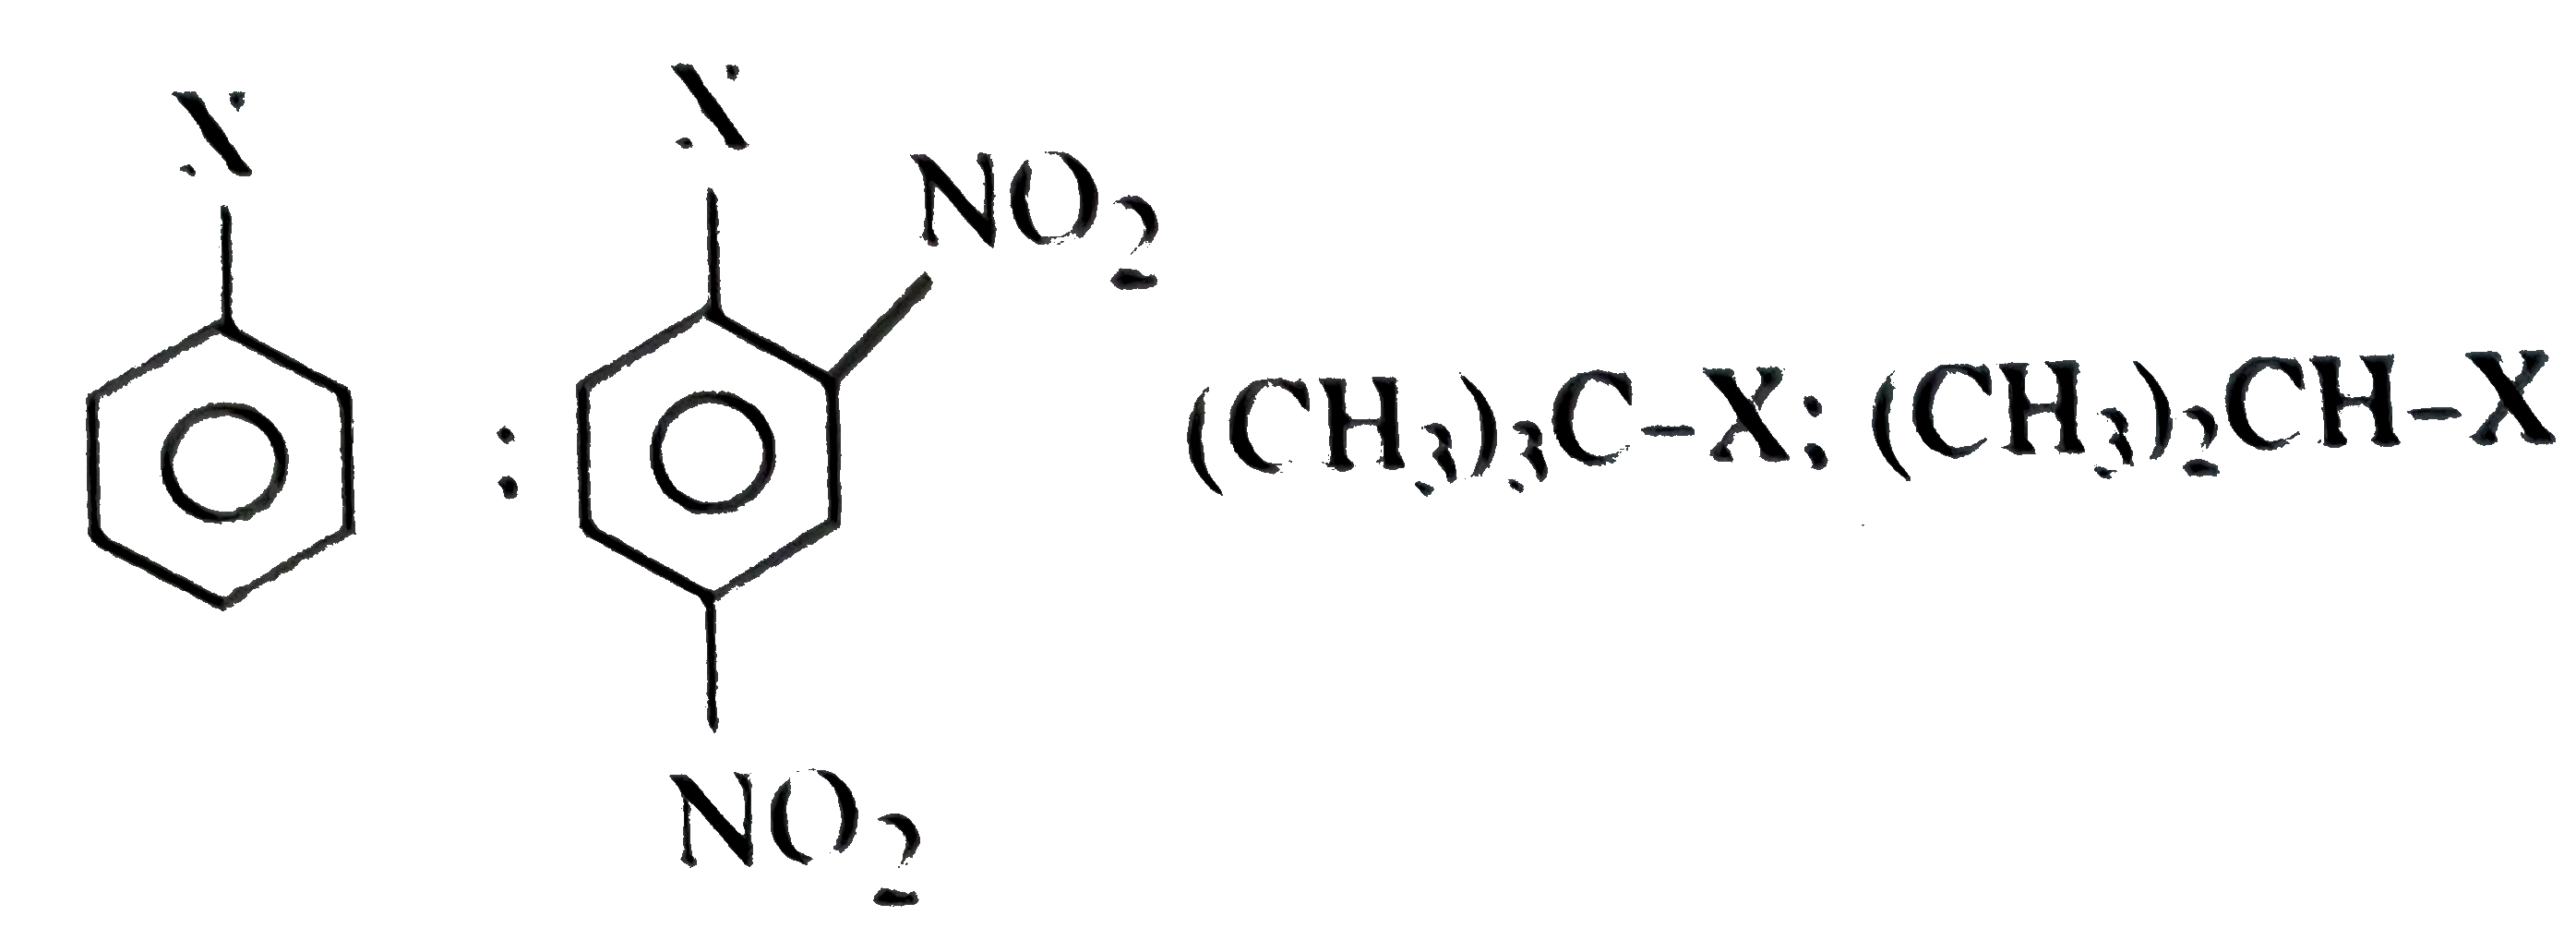 The correct order of increasing reactivity of C-X bond towards nucleophile in the following compounds is :